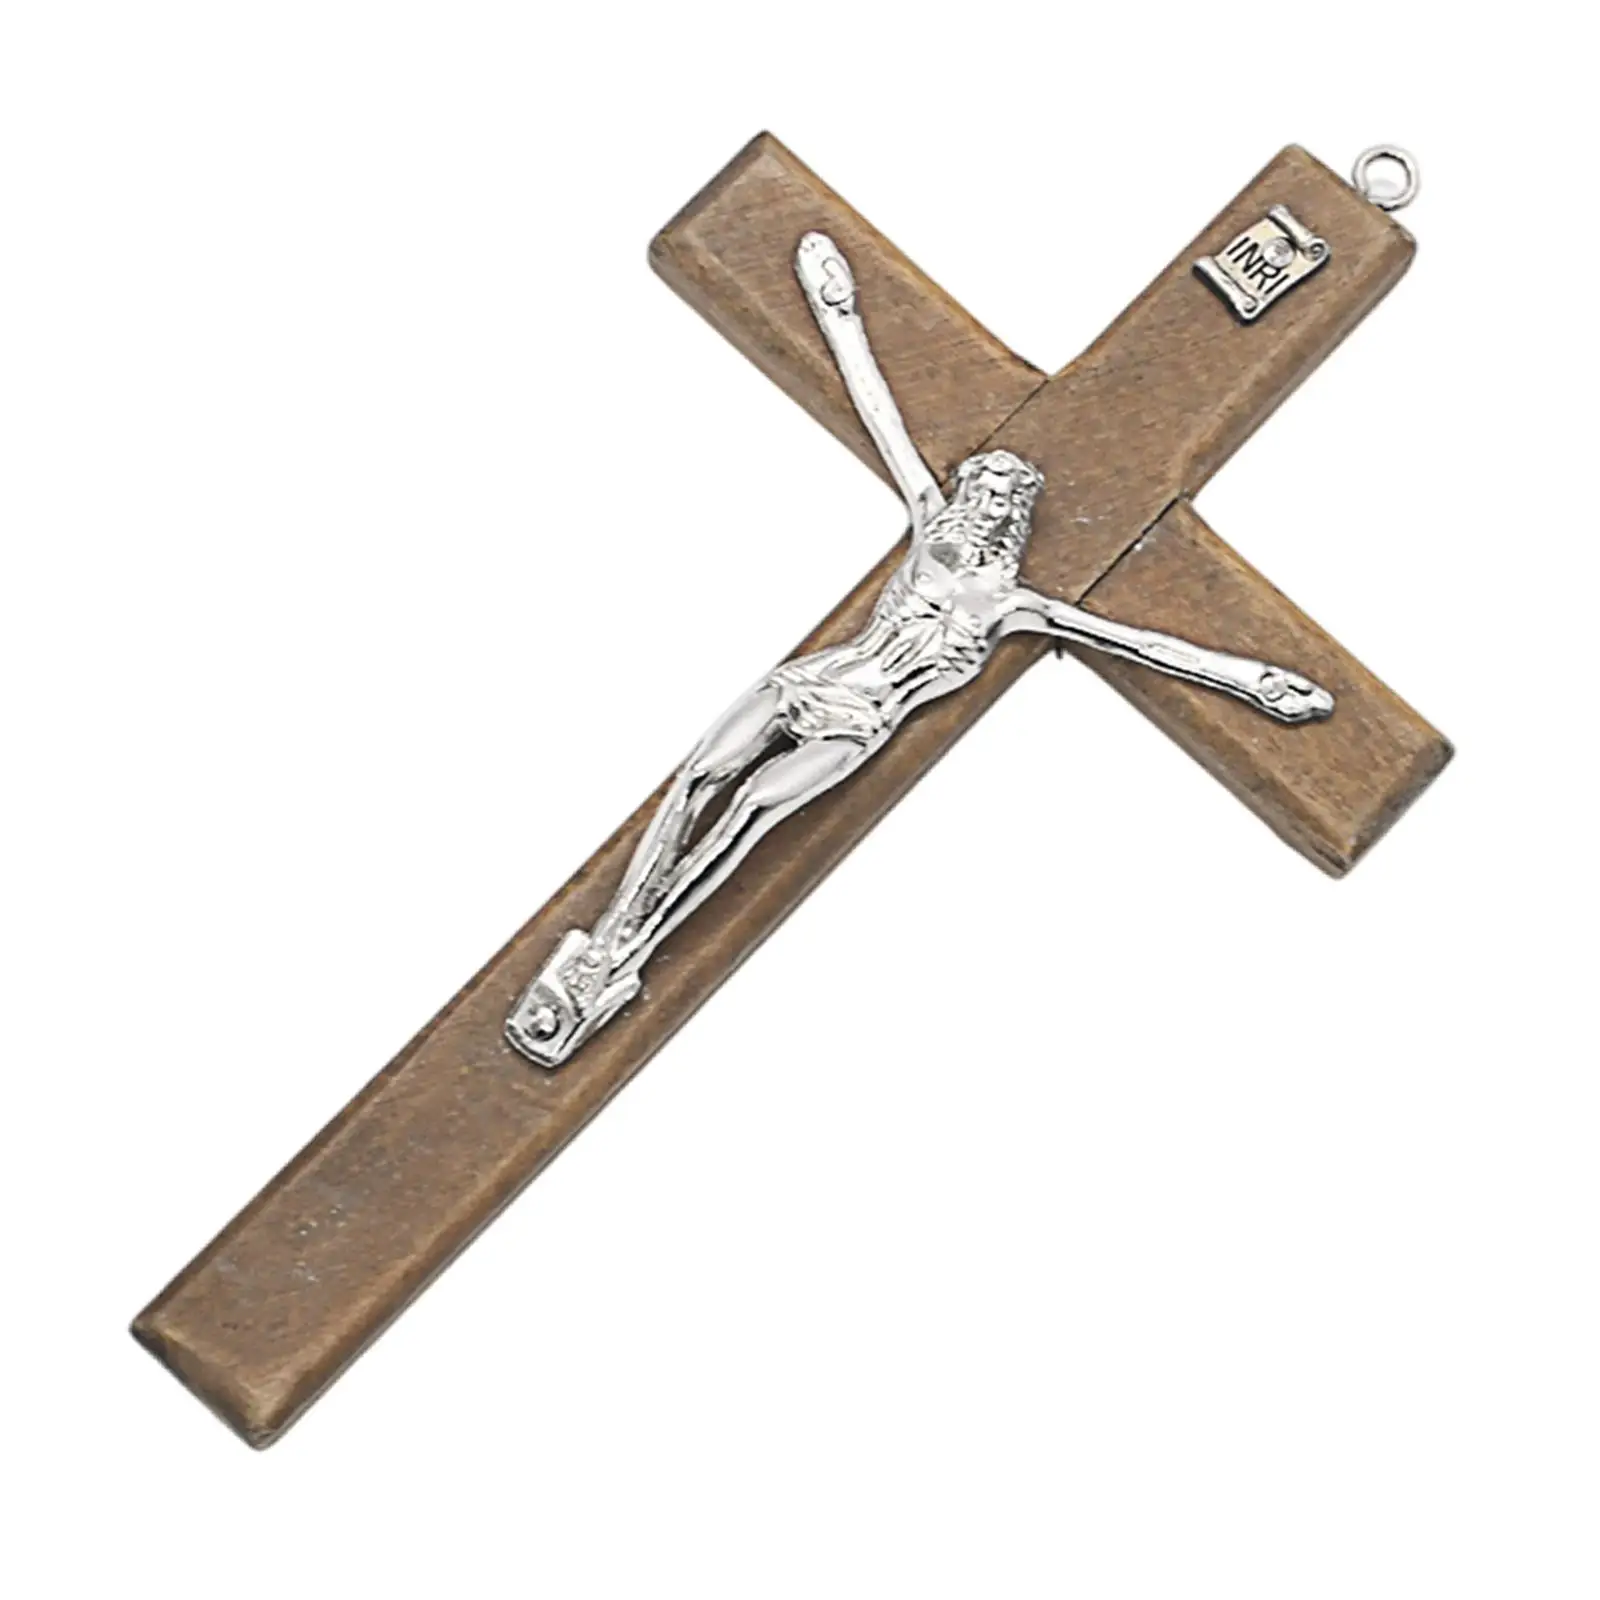 Fashion Crucifix Pendant Small Cross Charm for DIY Necklace DIY Gift Handmade Craft Accessories